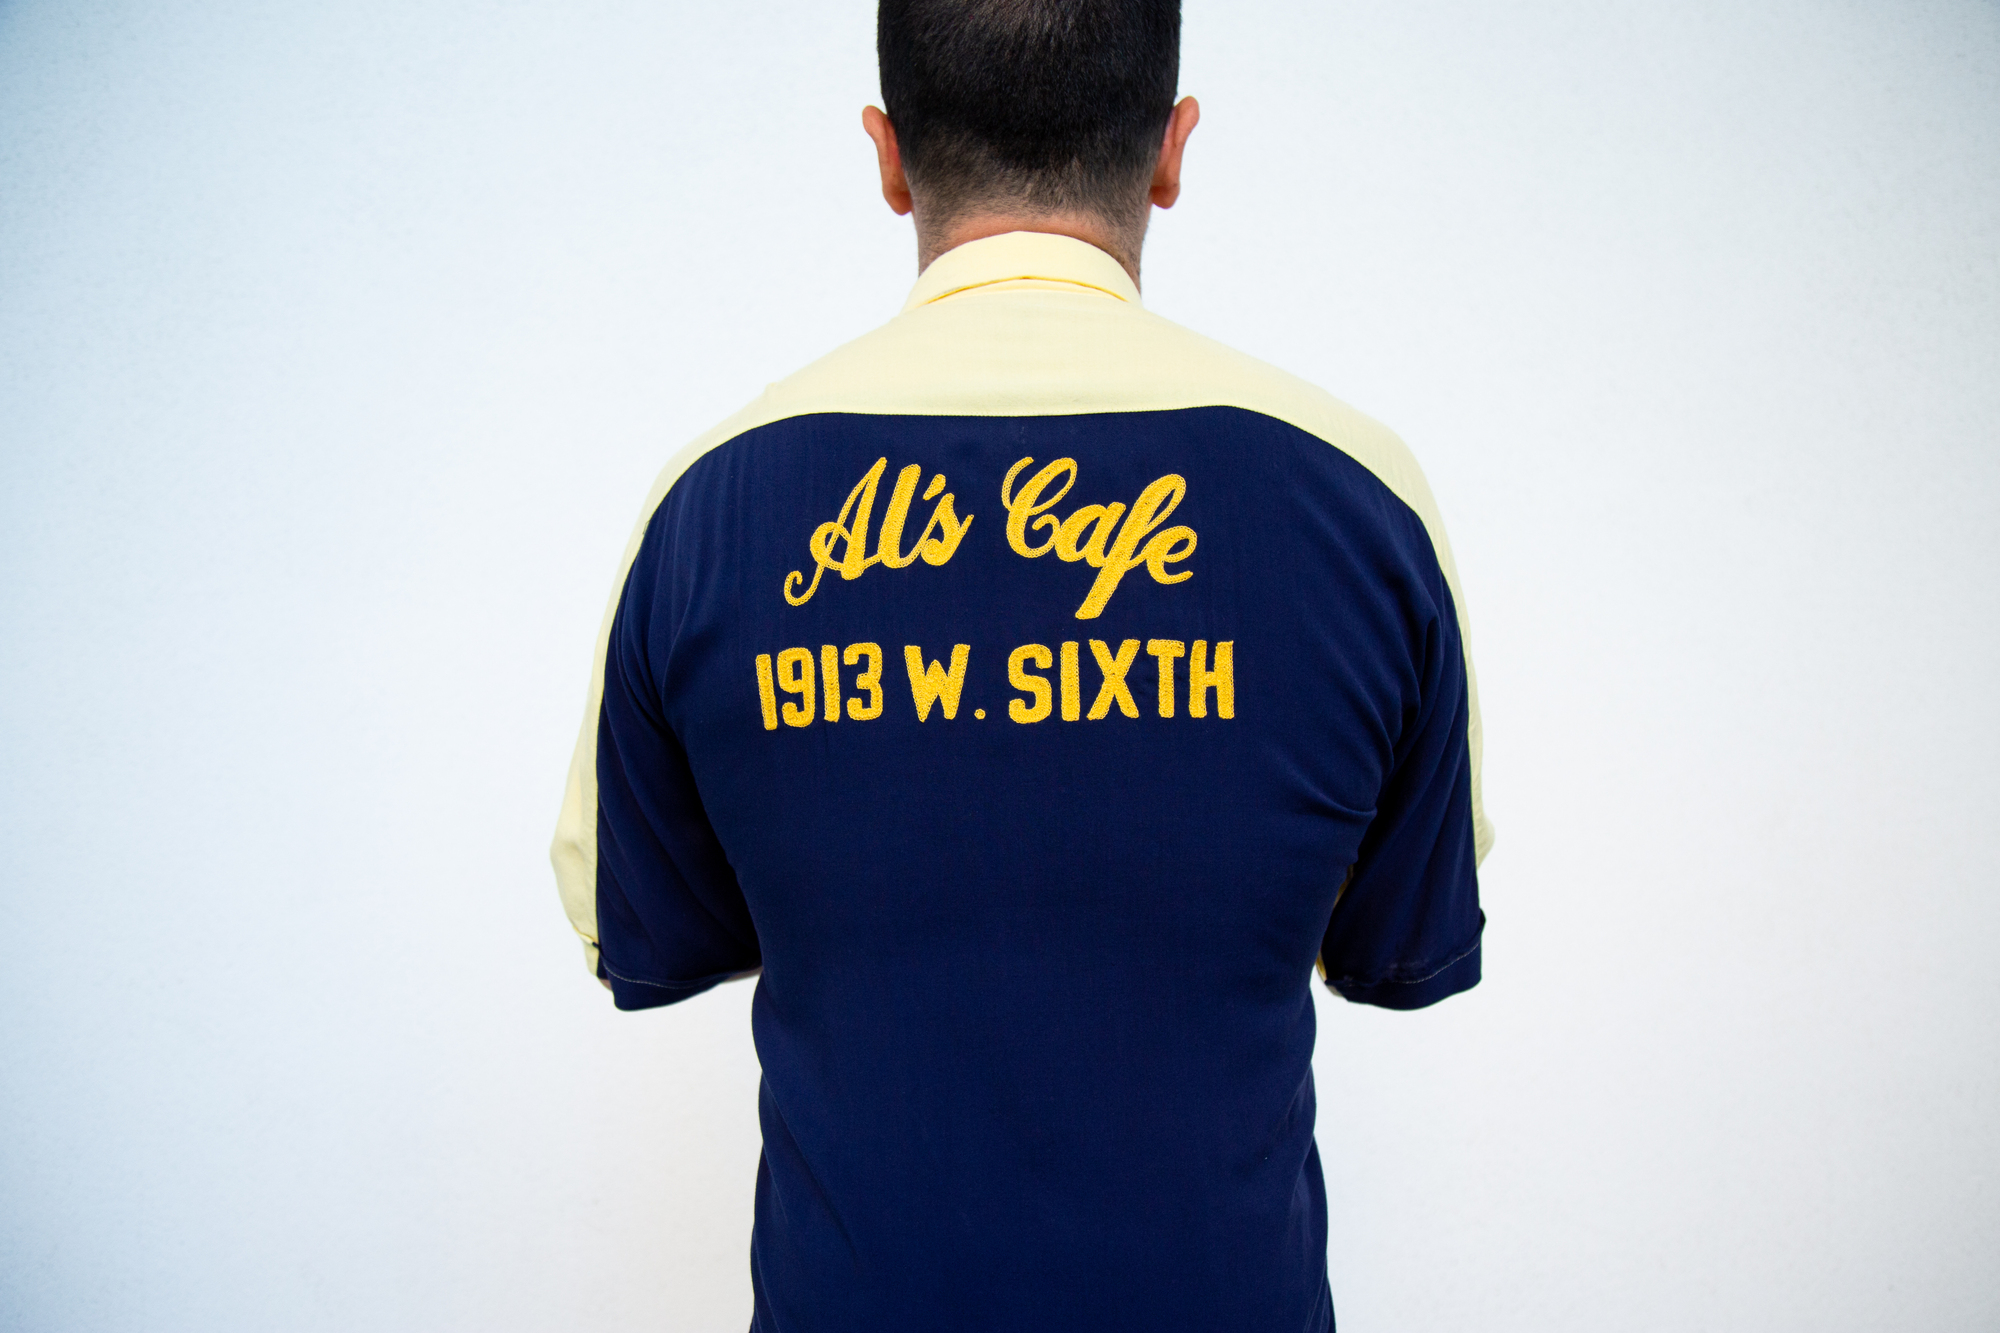 A blue shirt, seen from the back, embroidered with "Al's Cafe"